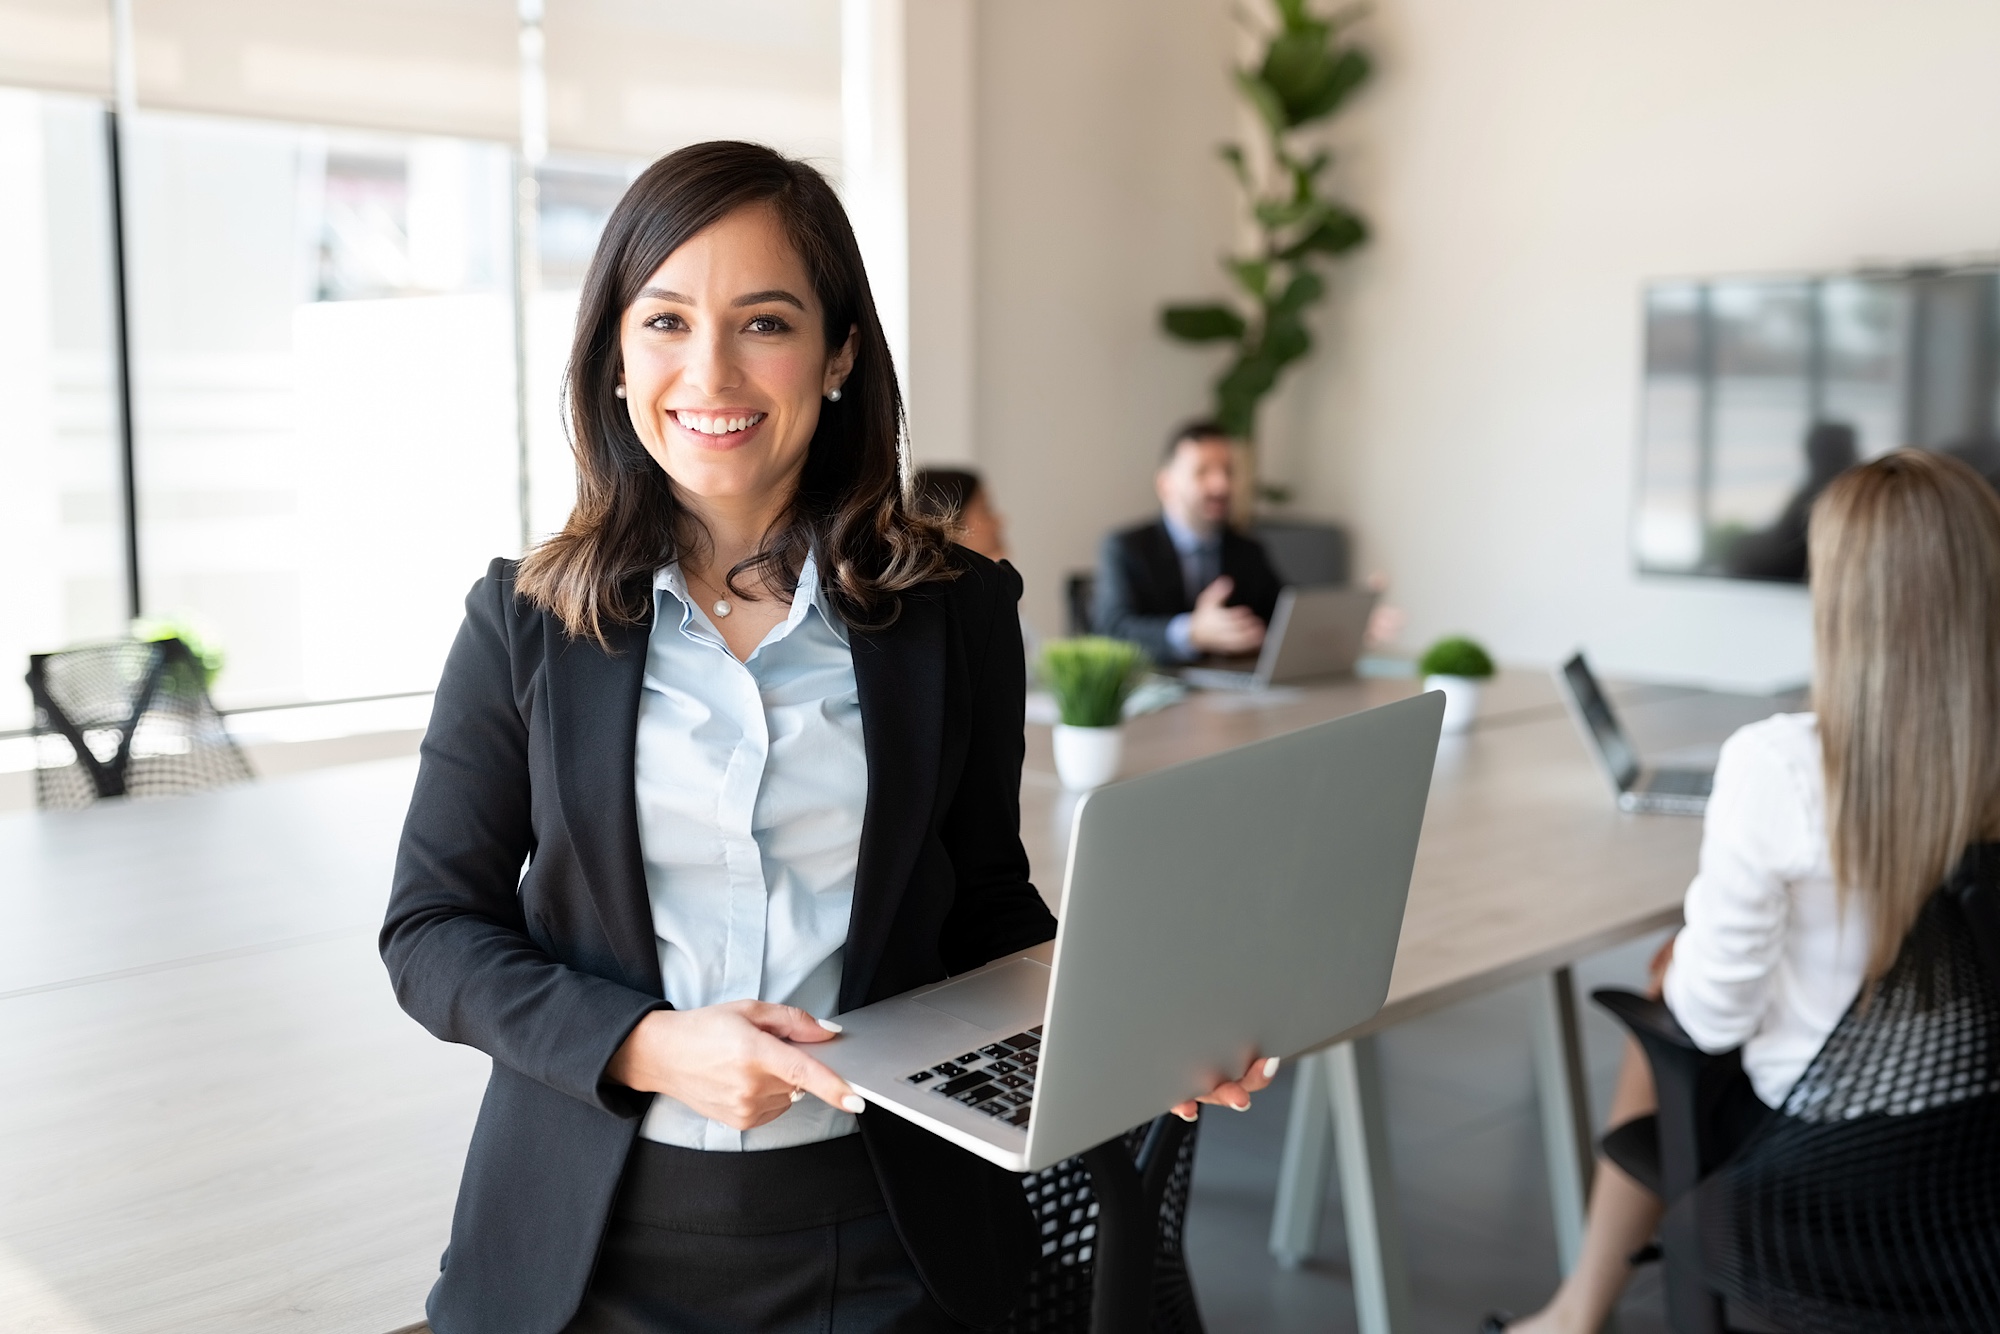 Smiling female entrepreneur with laptop in a meeting room